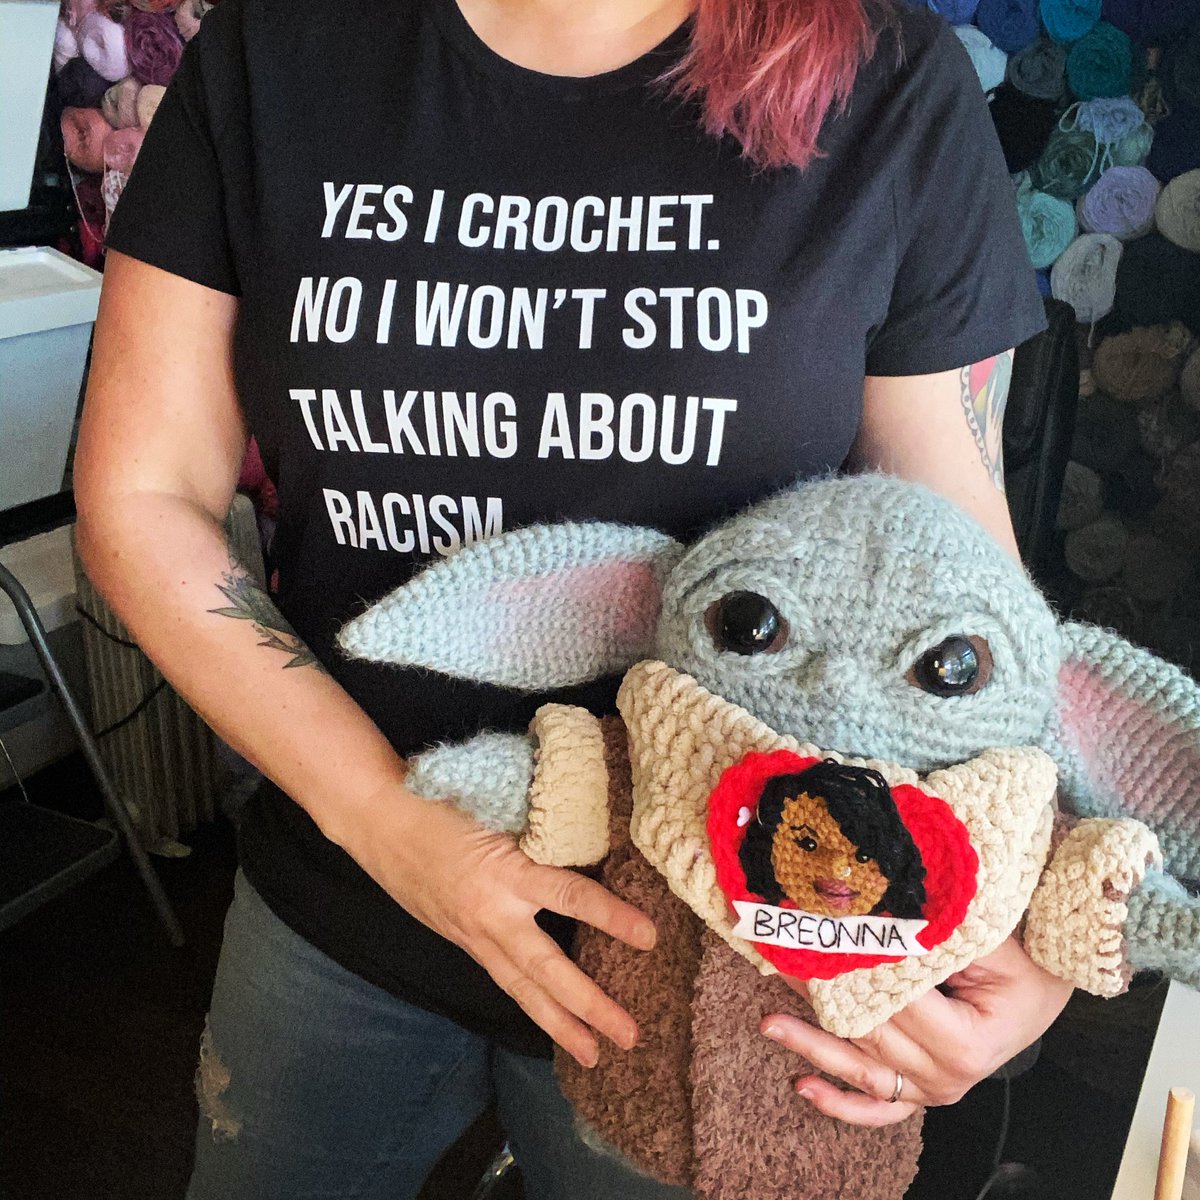 No matter what happens tonight. 
Thanks to my friend @Mister_Domestic for this shirt and if you haven’t already, go #vote ! #craftyiscool #amigurumi #crochet #crochetshirt #allisonhoffman #notforsale 👀